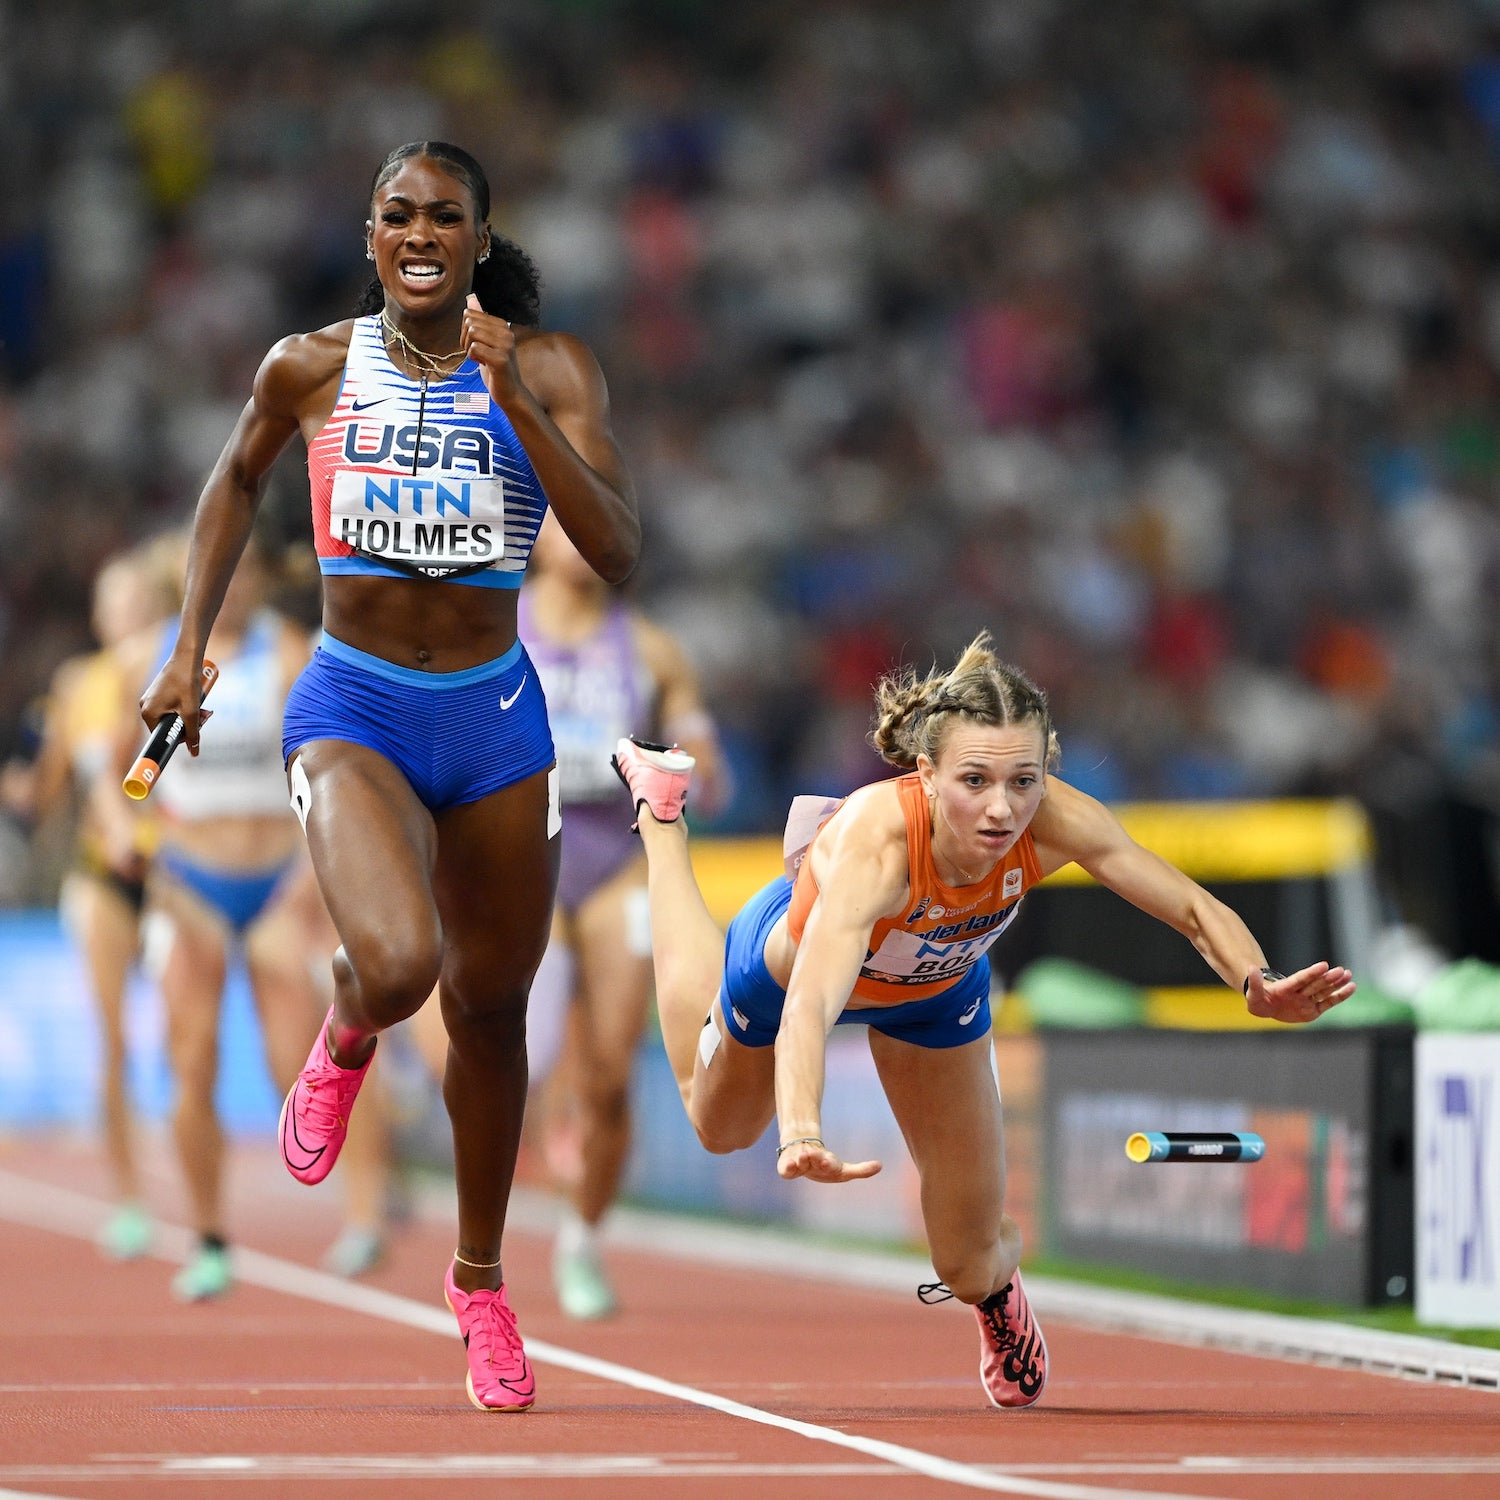 Top 10 Moments of the Track and Field World Championships in Budapest